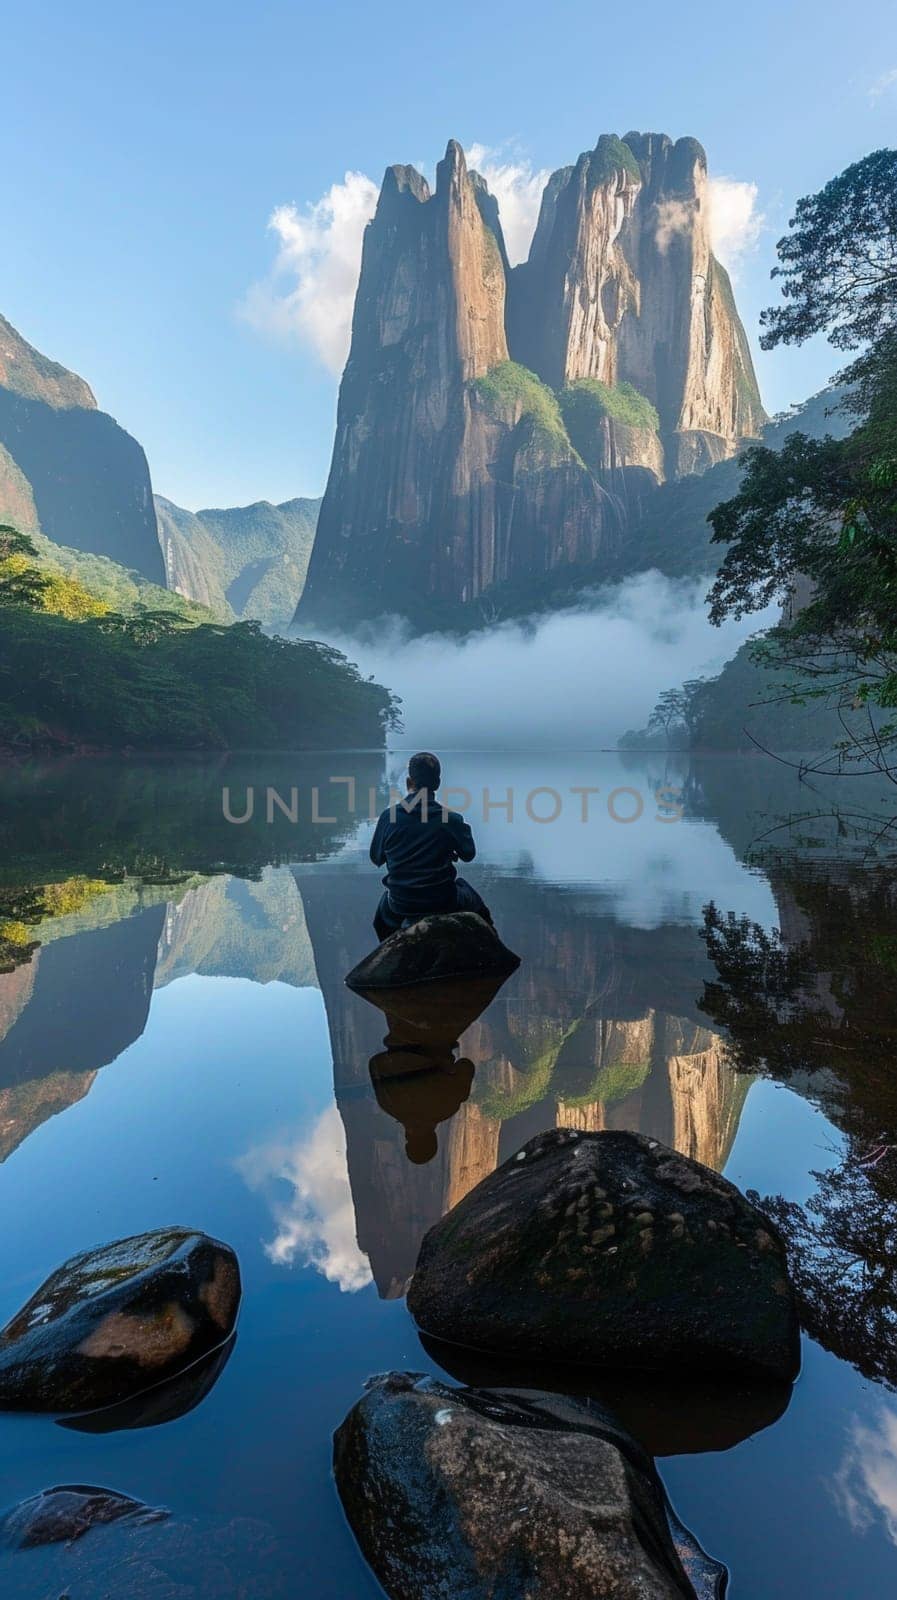 A man sitting on a rock in the middle of water